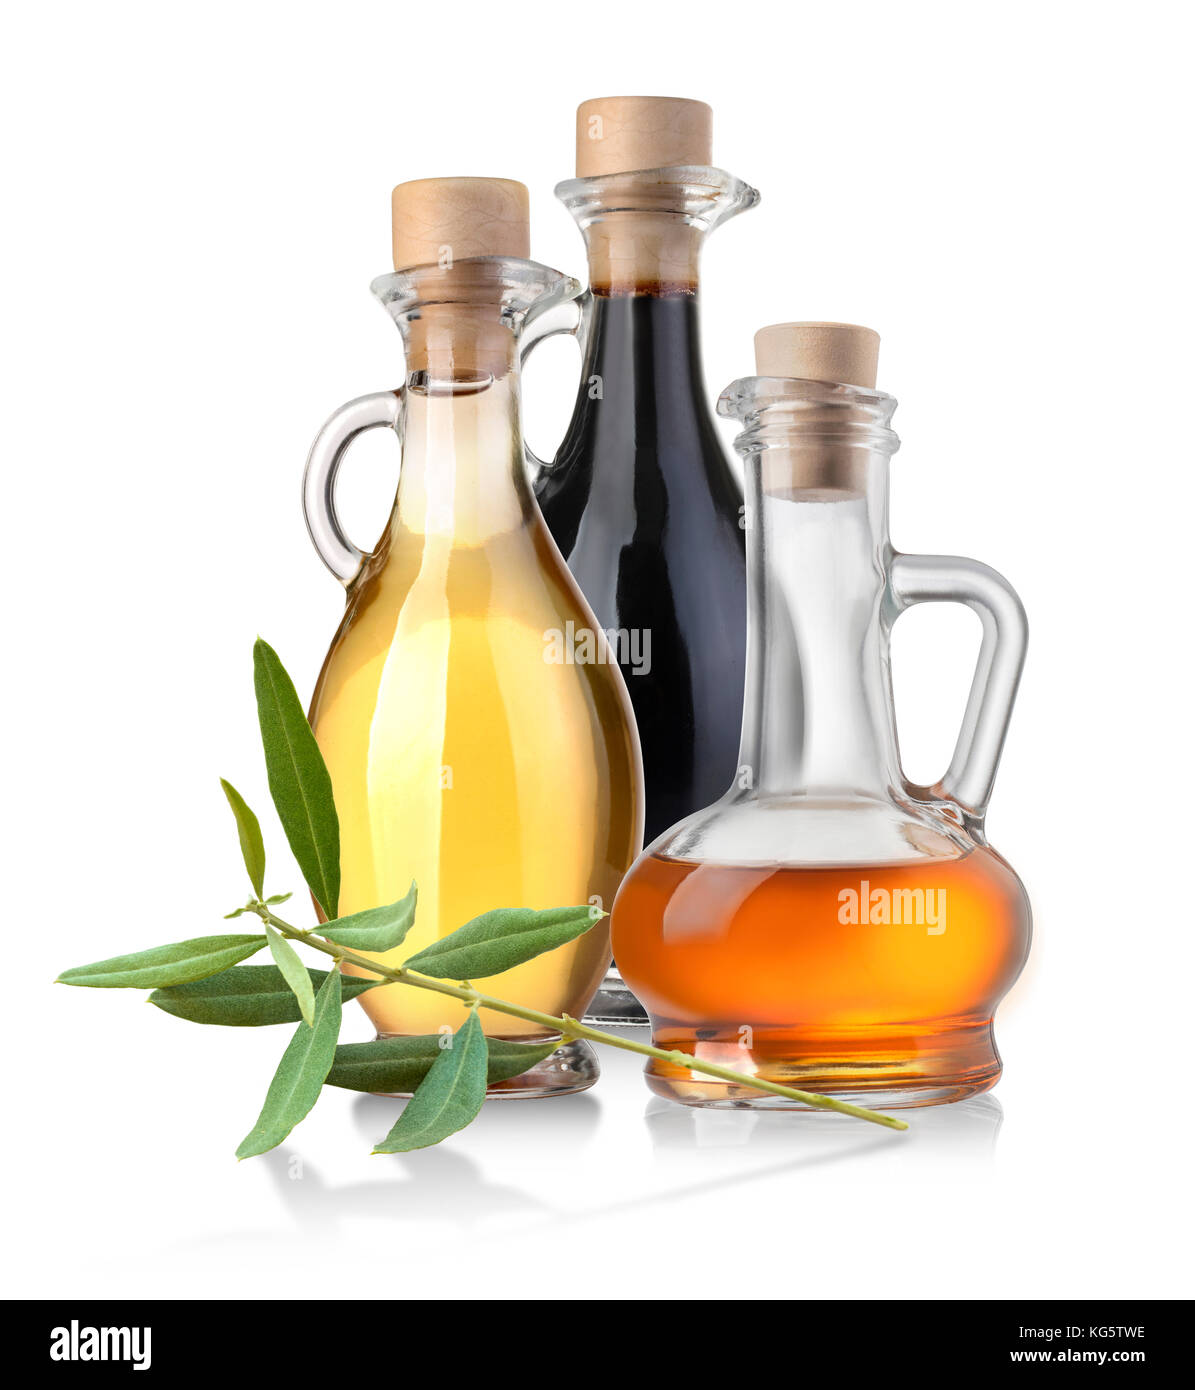 Olive oil bottles  isolated over white background with  olives with leaves Stock Photo